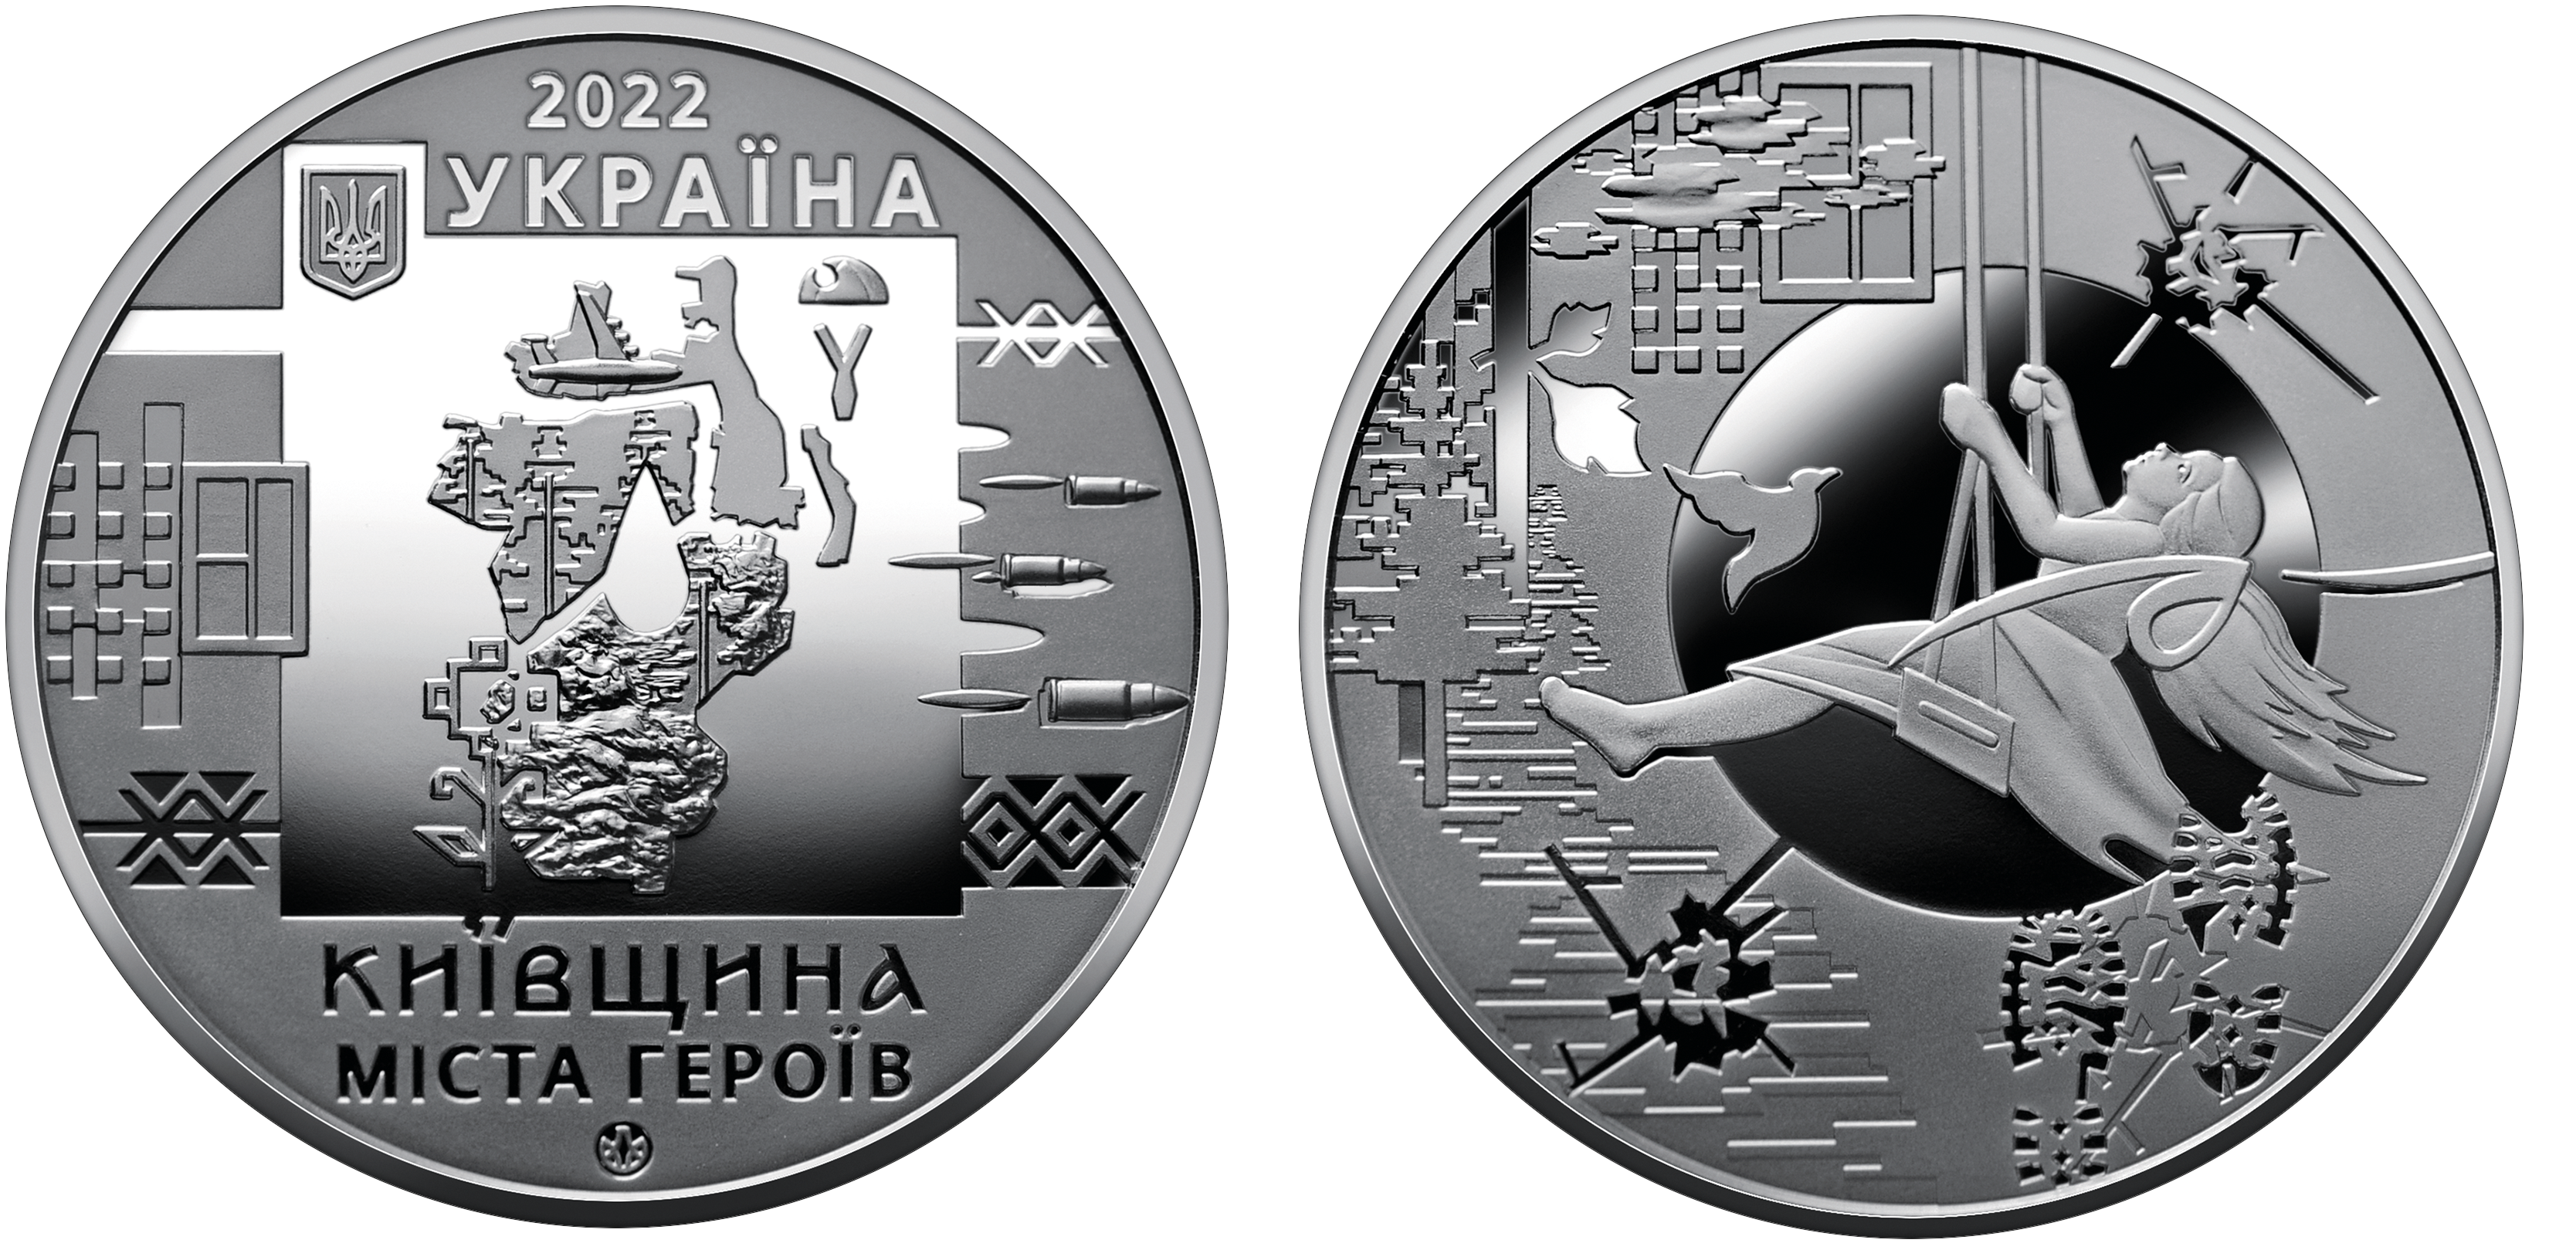 Sale of commemorative coins from MTB BANK • buy commemorative coins in Ukraine at MTB BANK - photo - mtb.ua